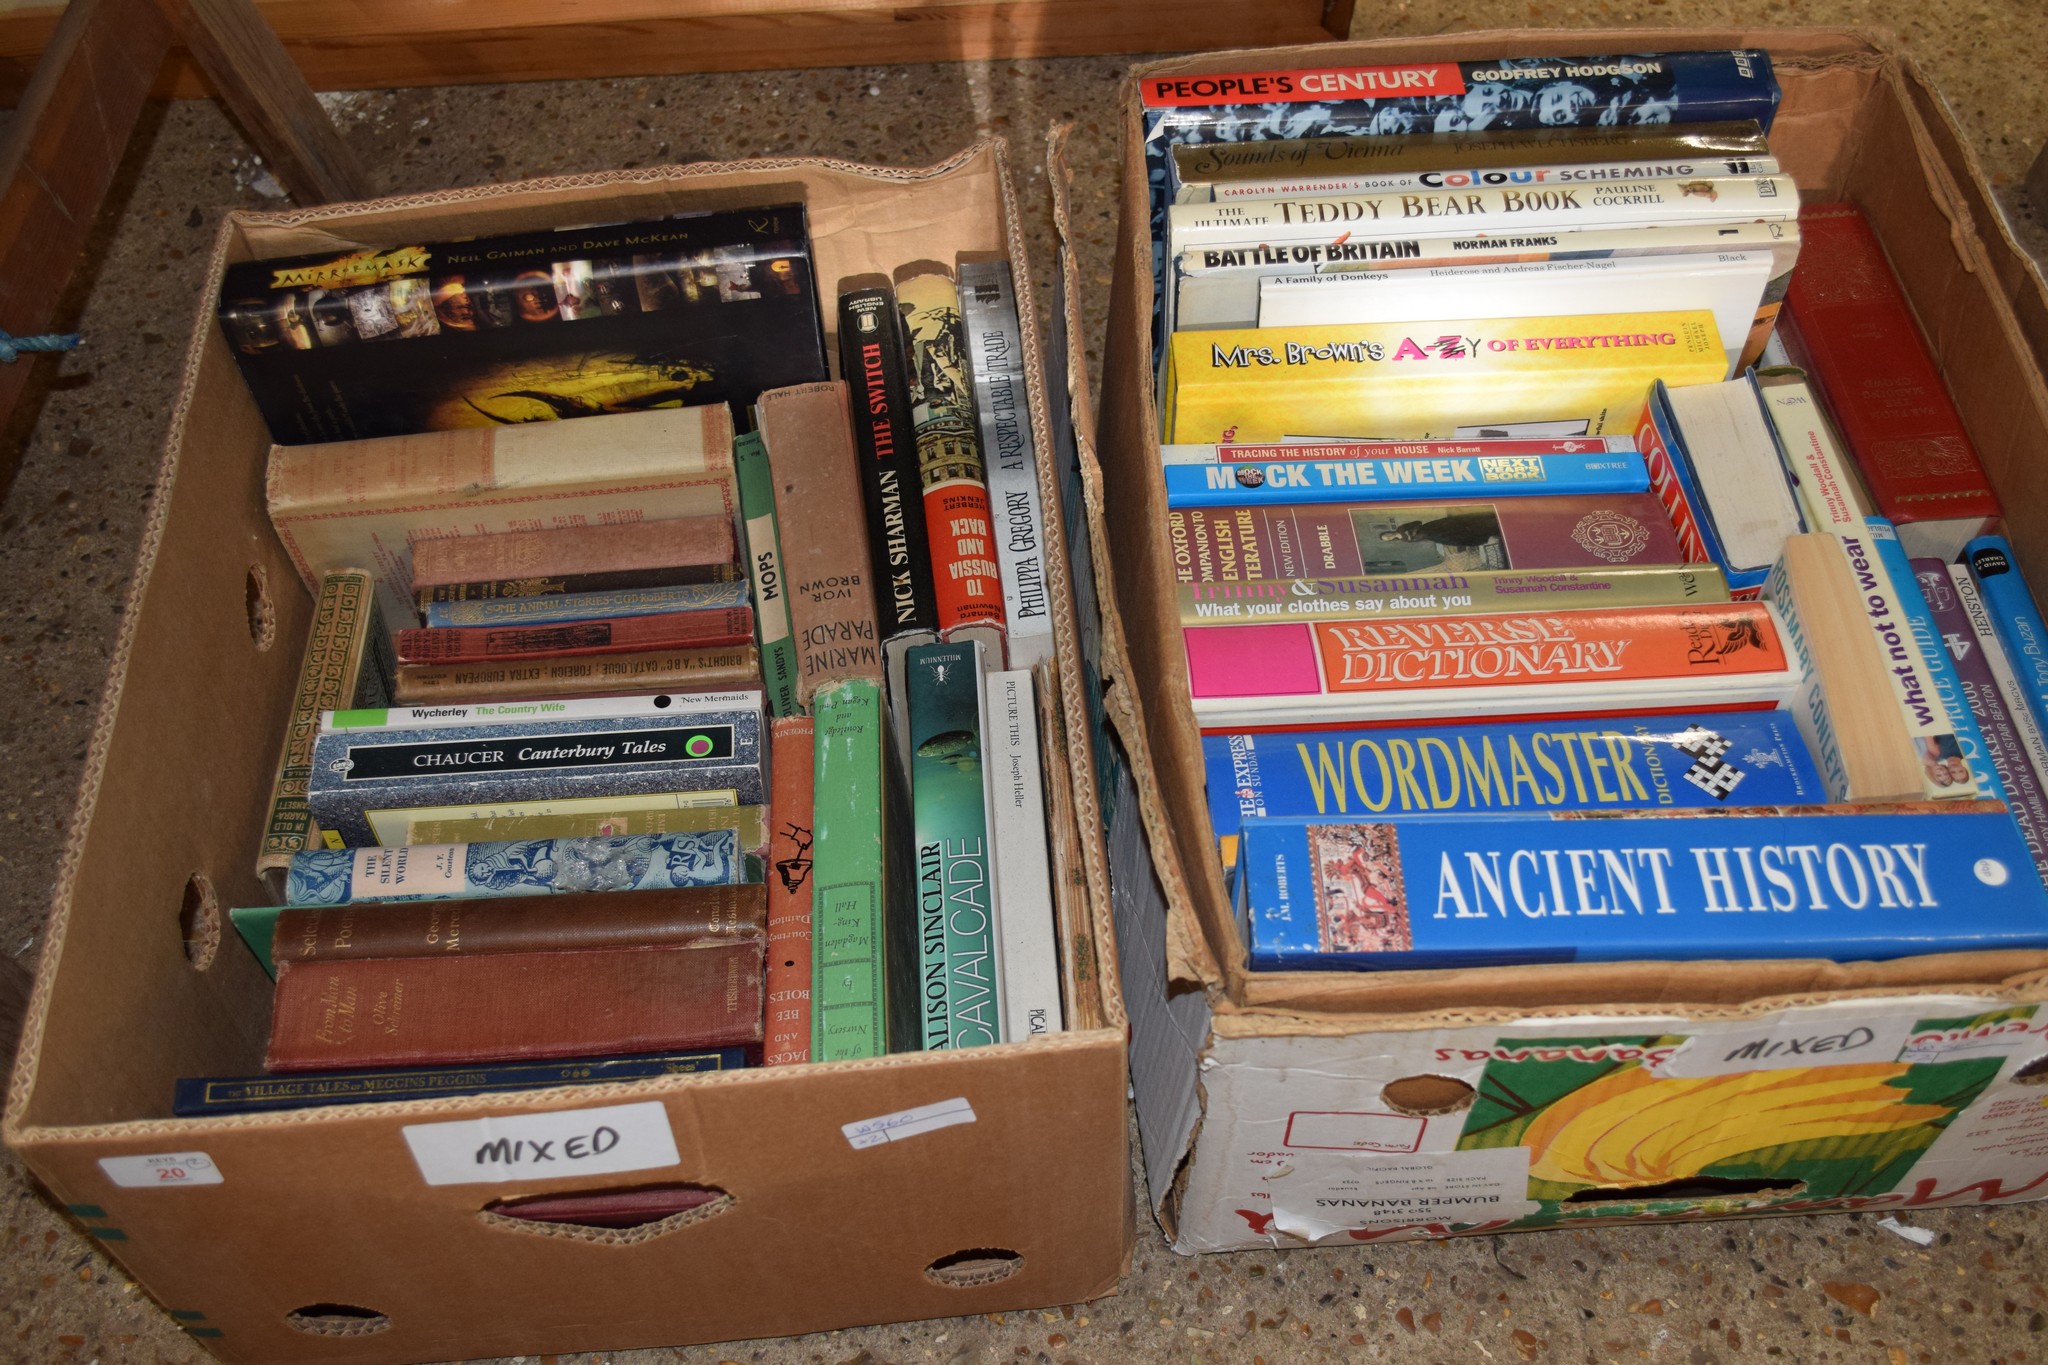 TWO BOXES OF BOOKS, VARIOUS REFERENCE BOOKS AND NOVELS